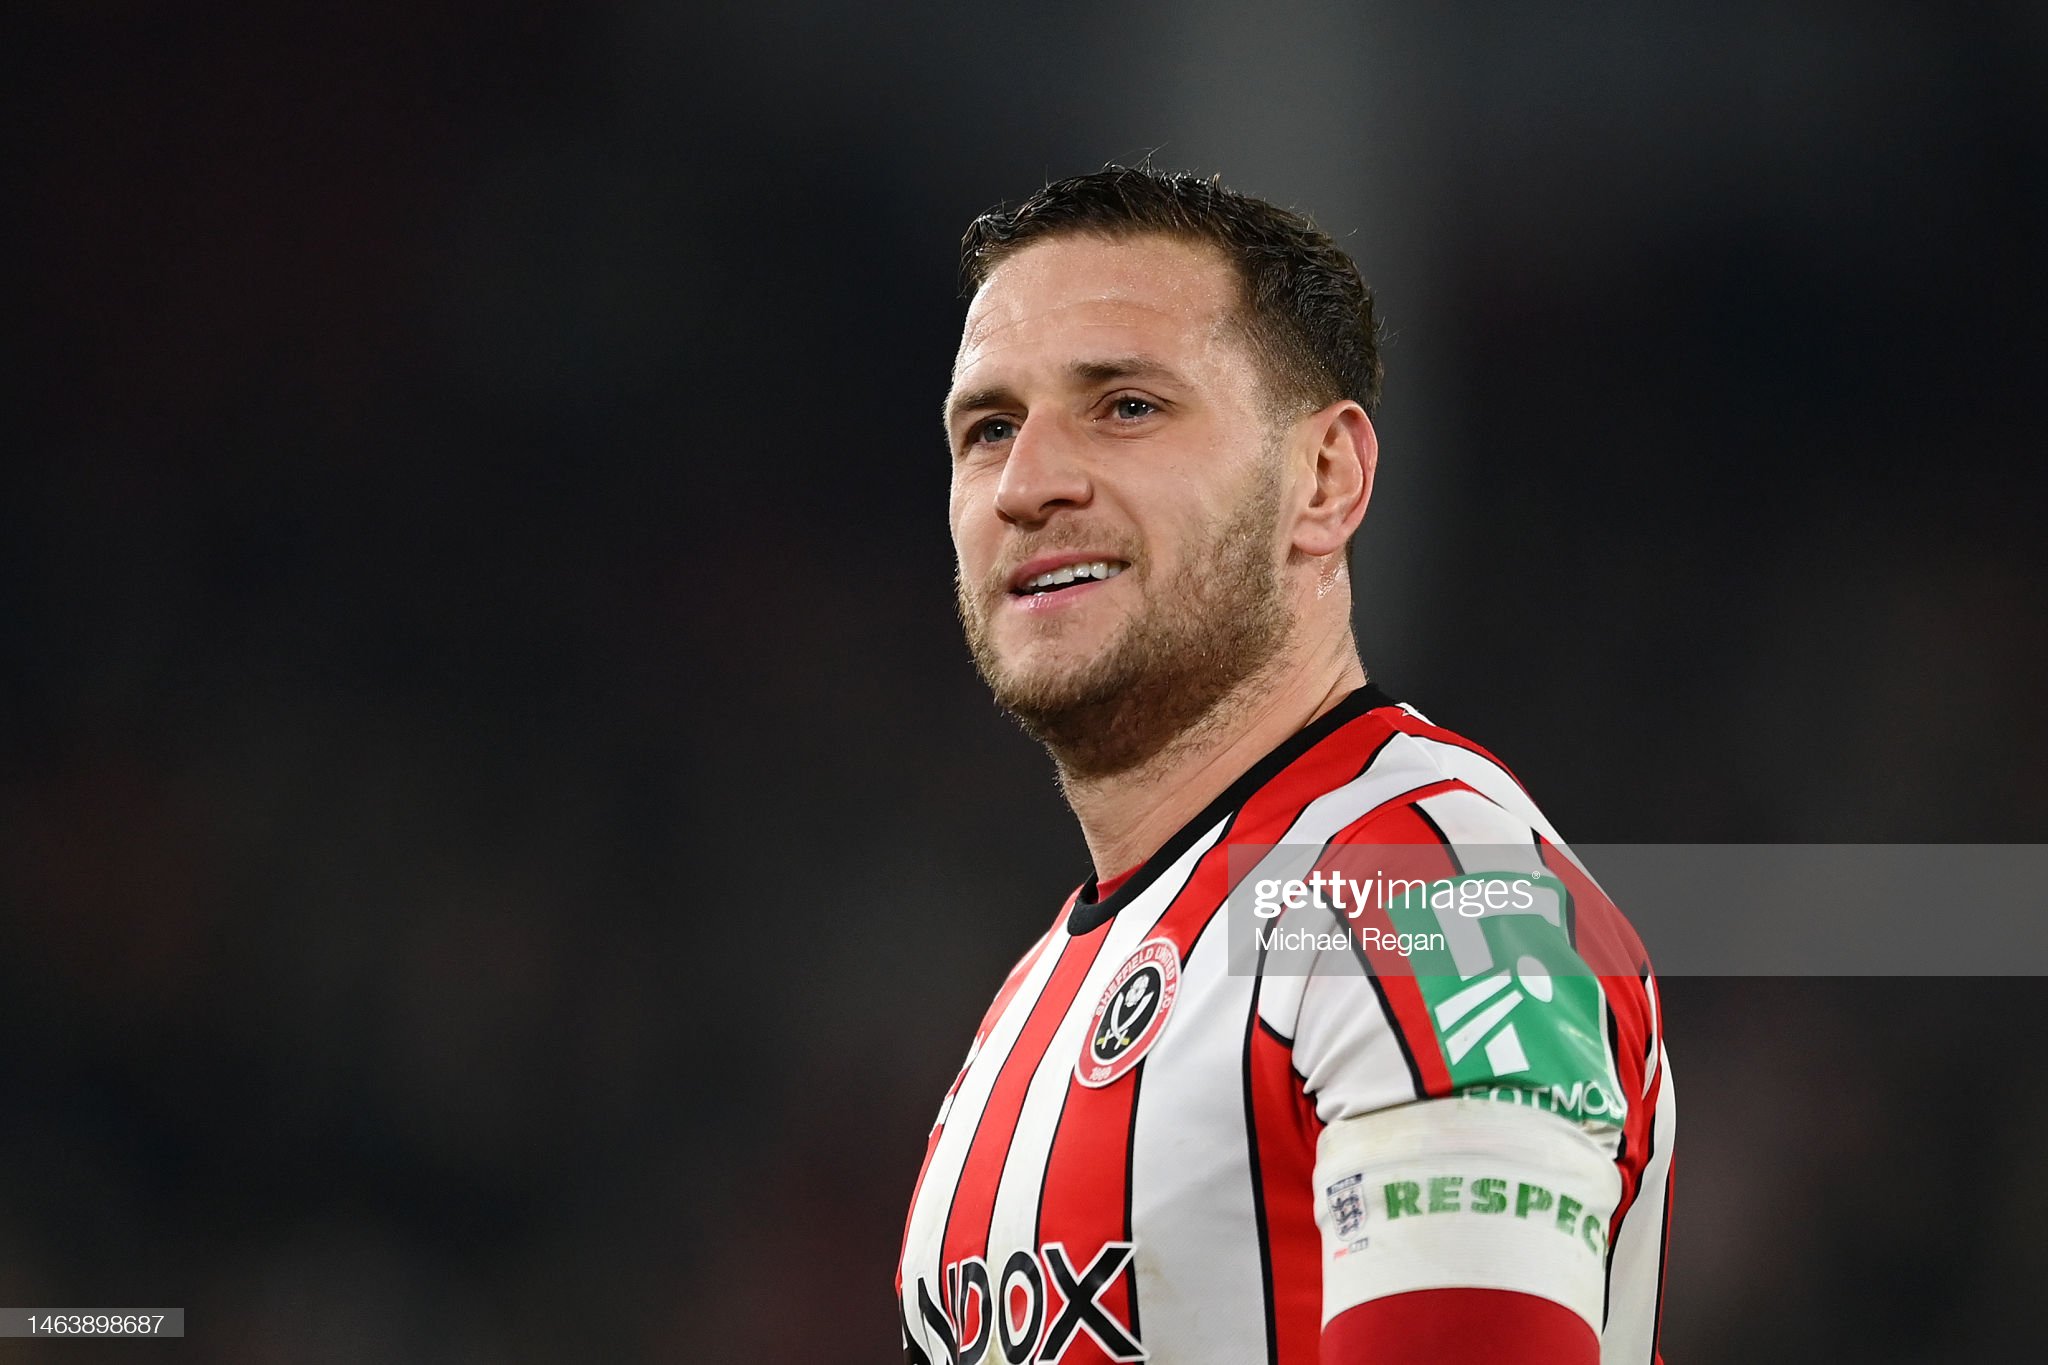 Billy Sharp wearing his red and white uniform